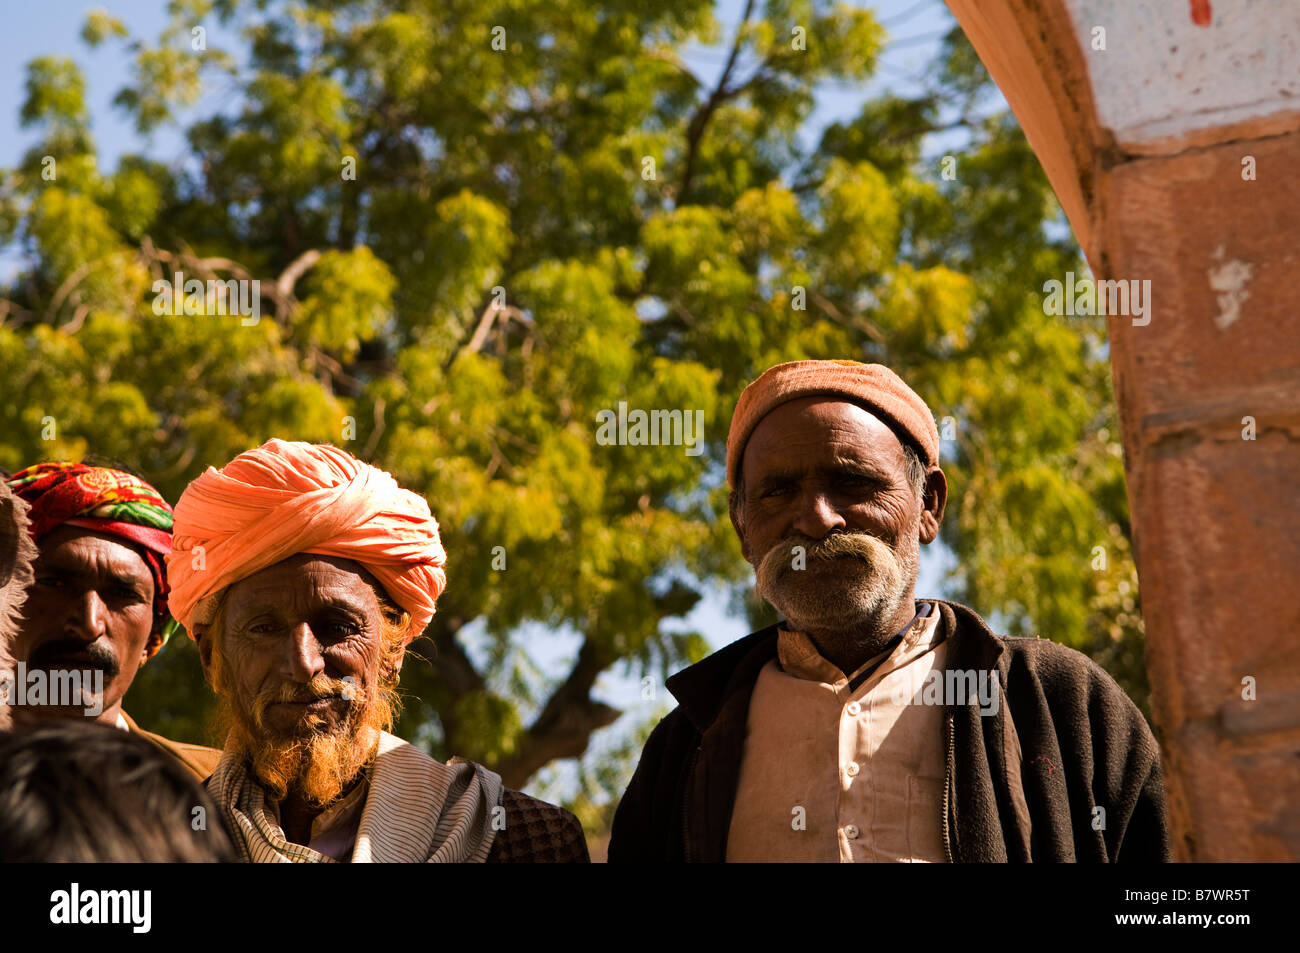 Rajasthani men pose for a picture. Stock Photo